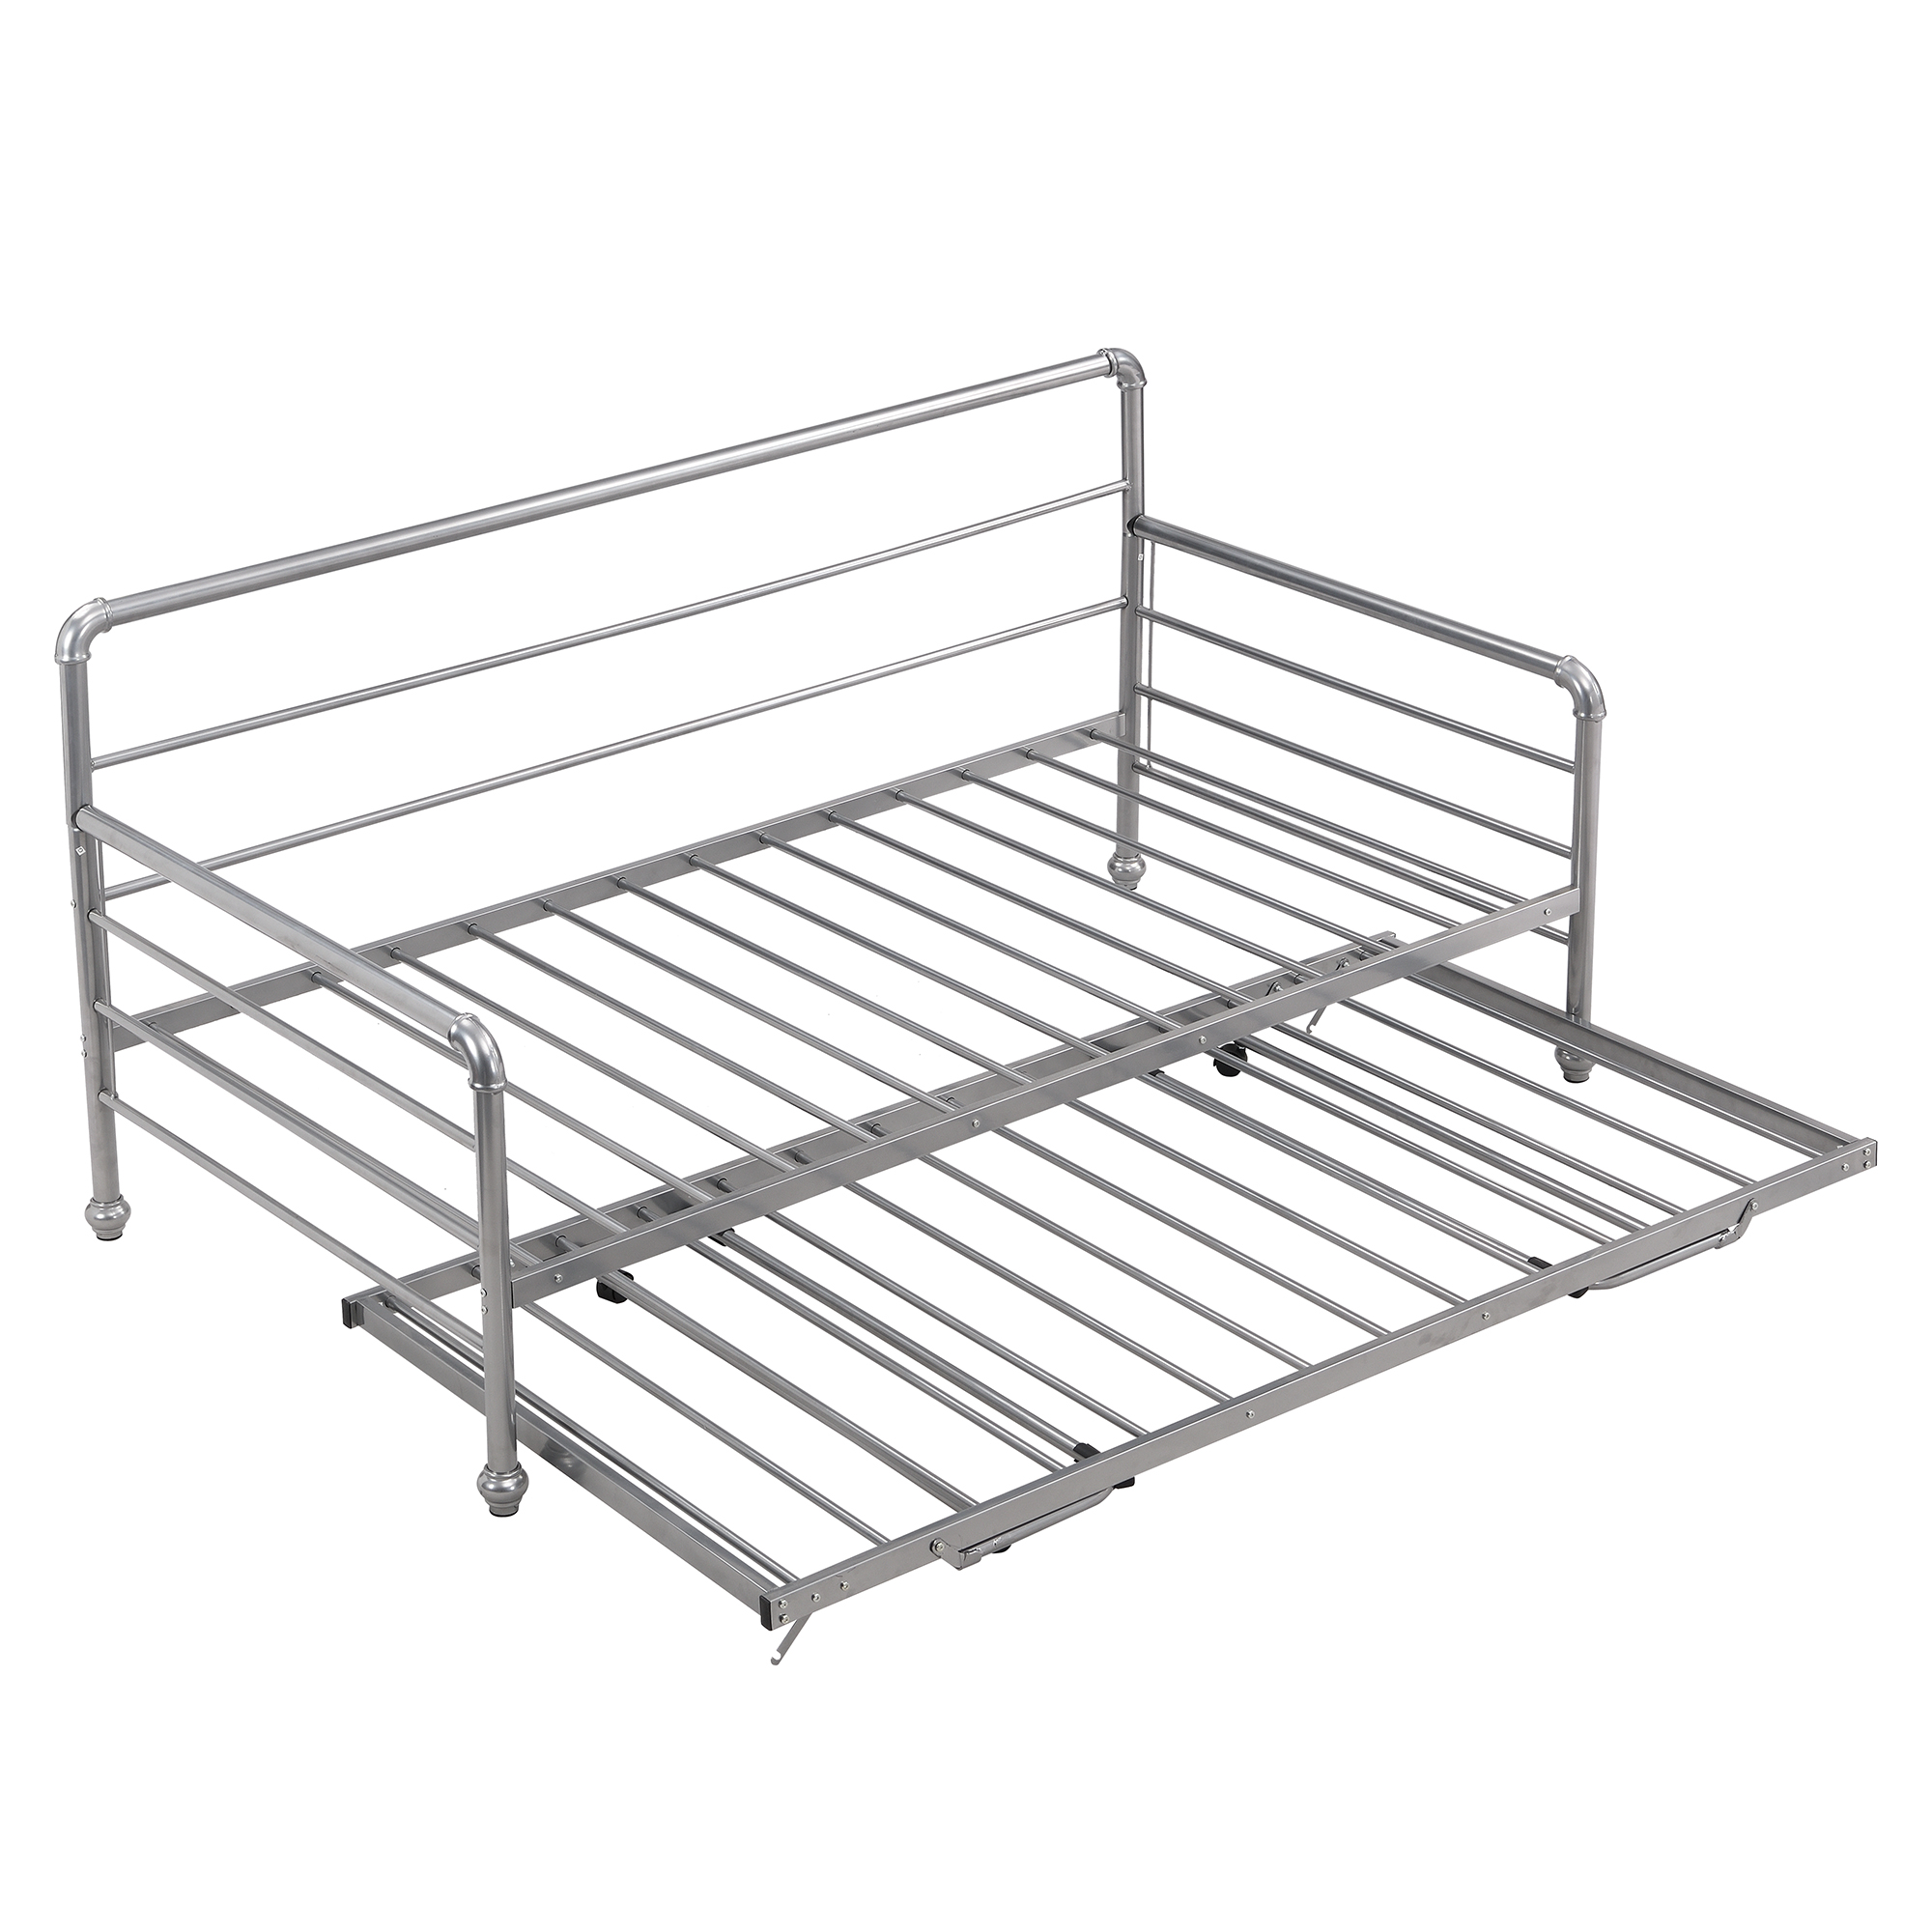 Kacho Twin Size Daybed with Adjustable Trundle, Pop Up Trundle, Heavy-Duty Steel Daybed for Bedroom Living Room, for Boys Girls Adults, Space Saving No Box Spring Need, Silver - image 4 of 7